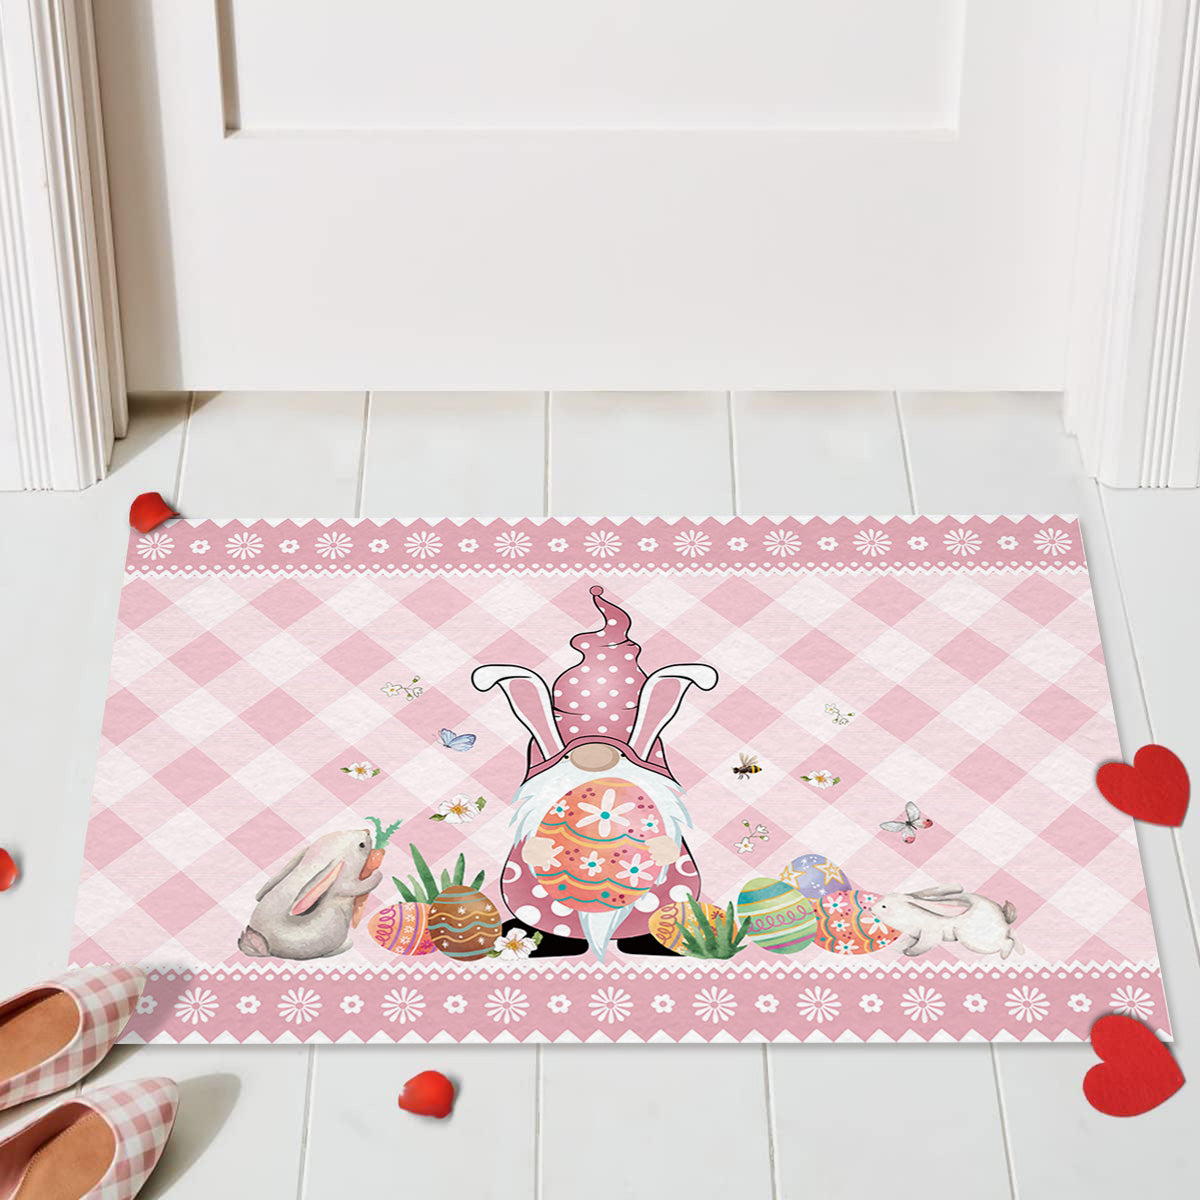 Gnome With Rabbit - Easter Themed Doormat